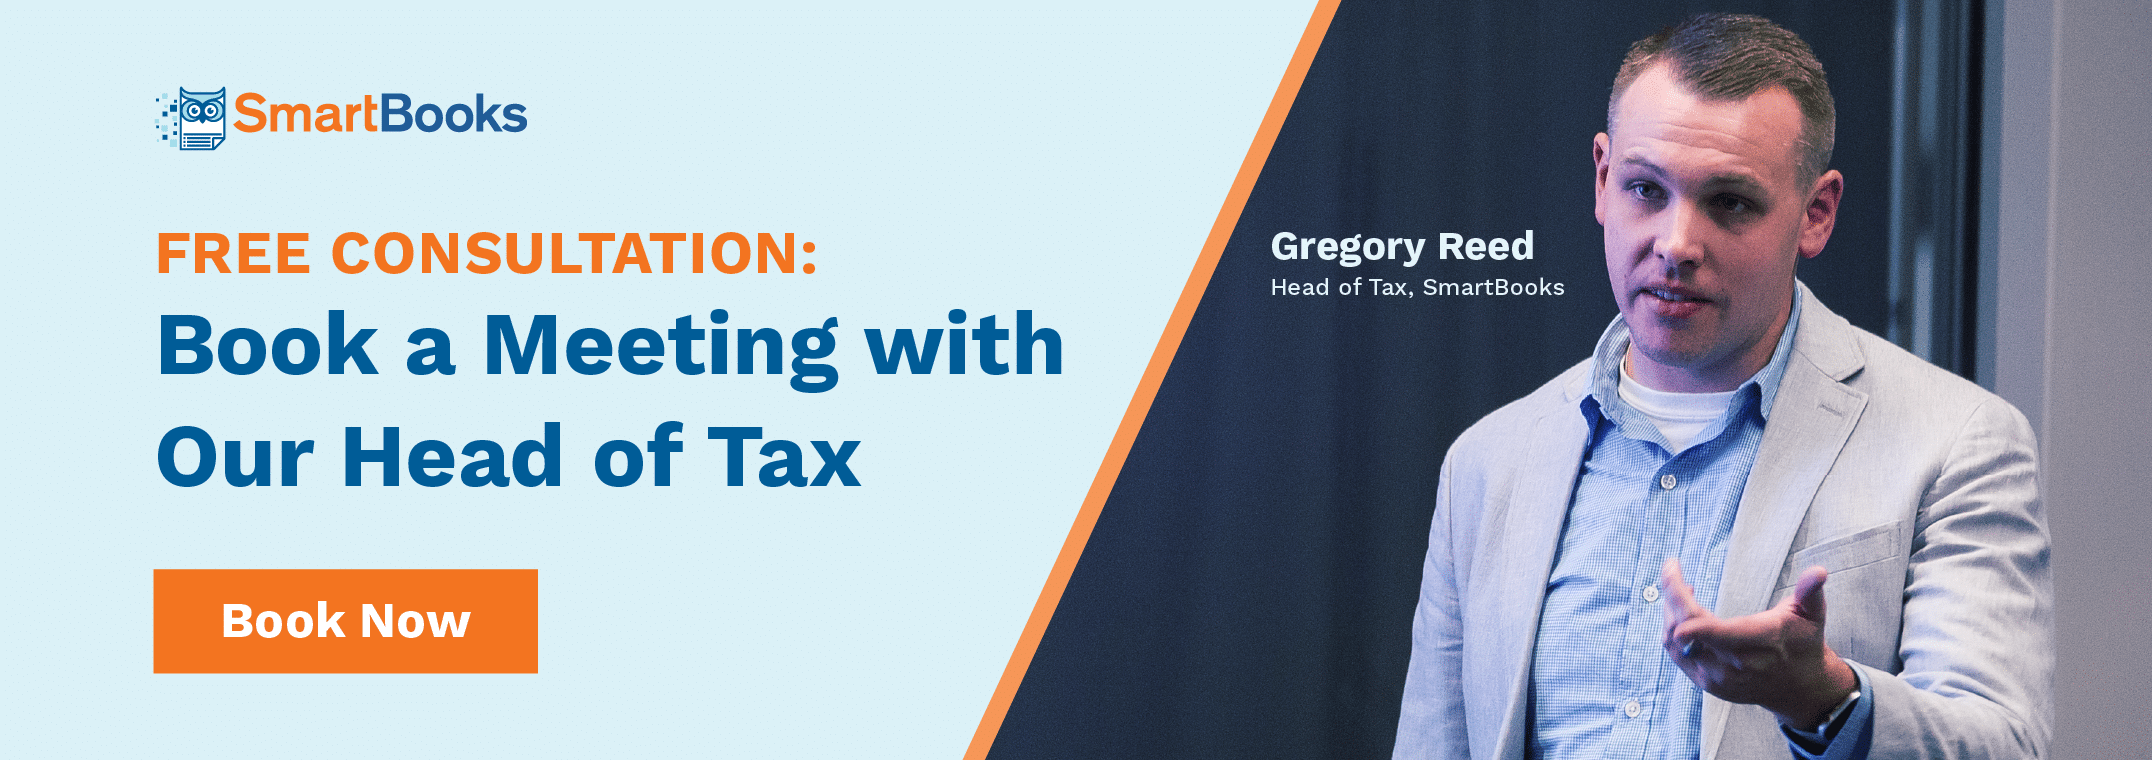 Book a meeting with our Head of Tax